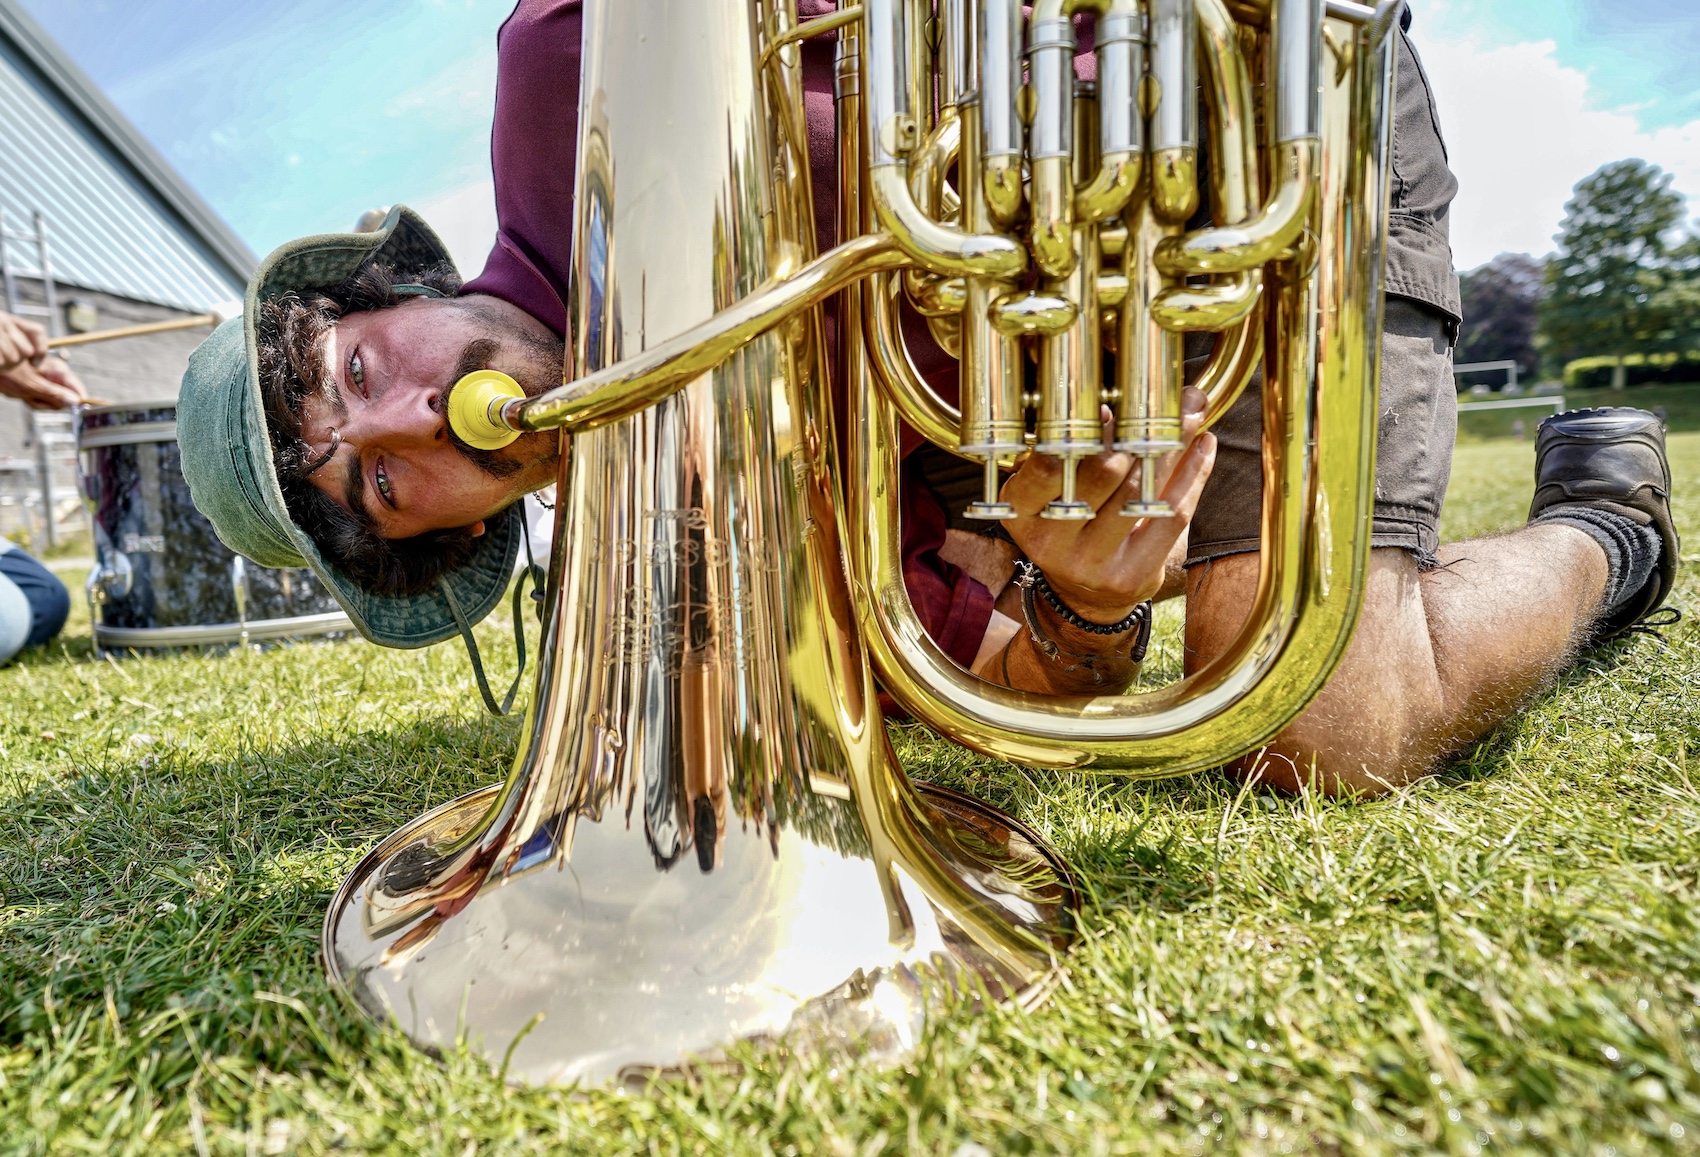 A competitor uses a brass instrument trumpet to lure worms